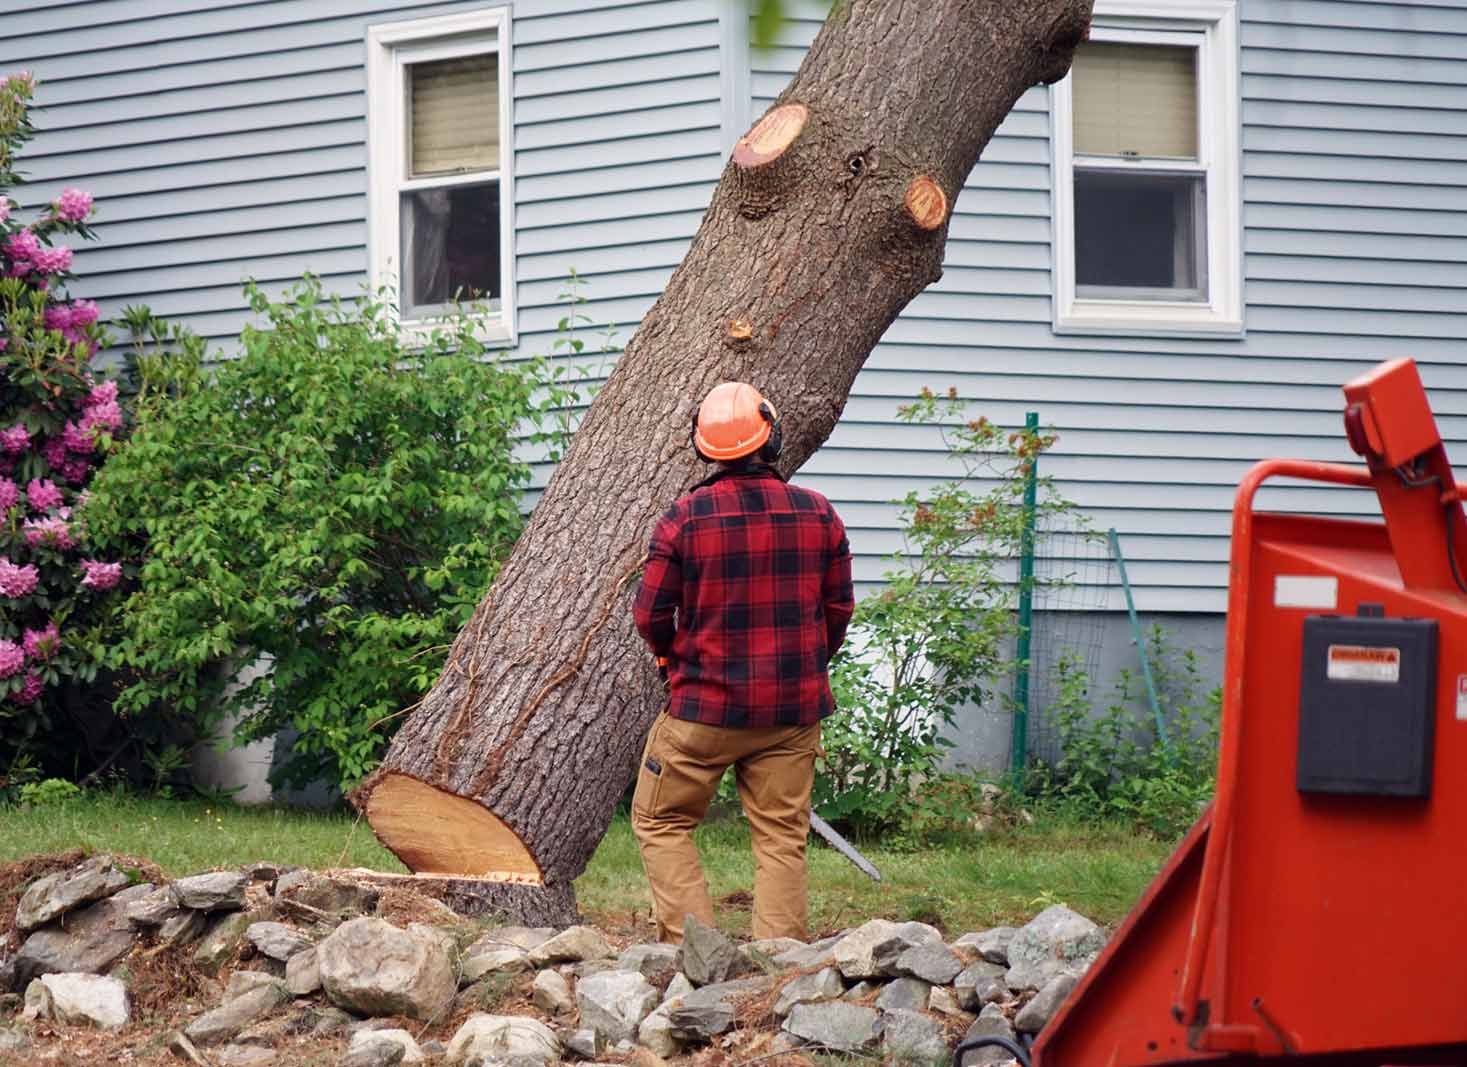 How to cut down a tree on your property without fines NSW